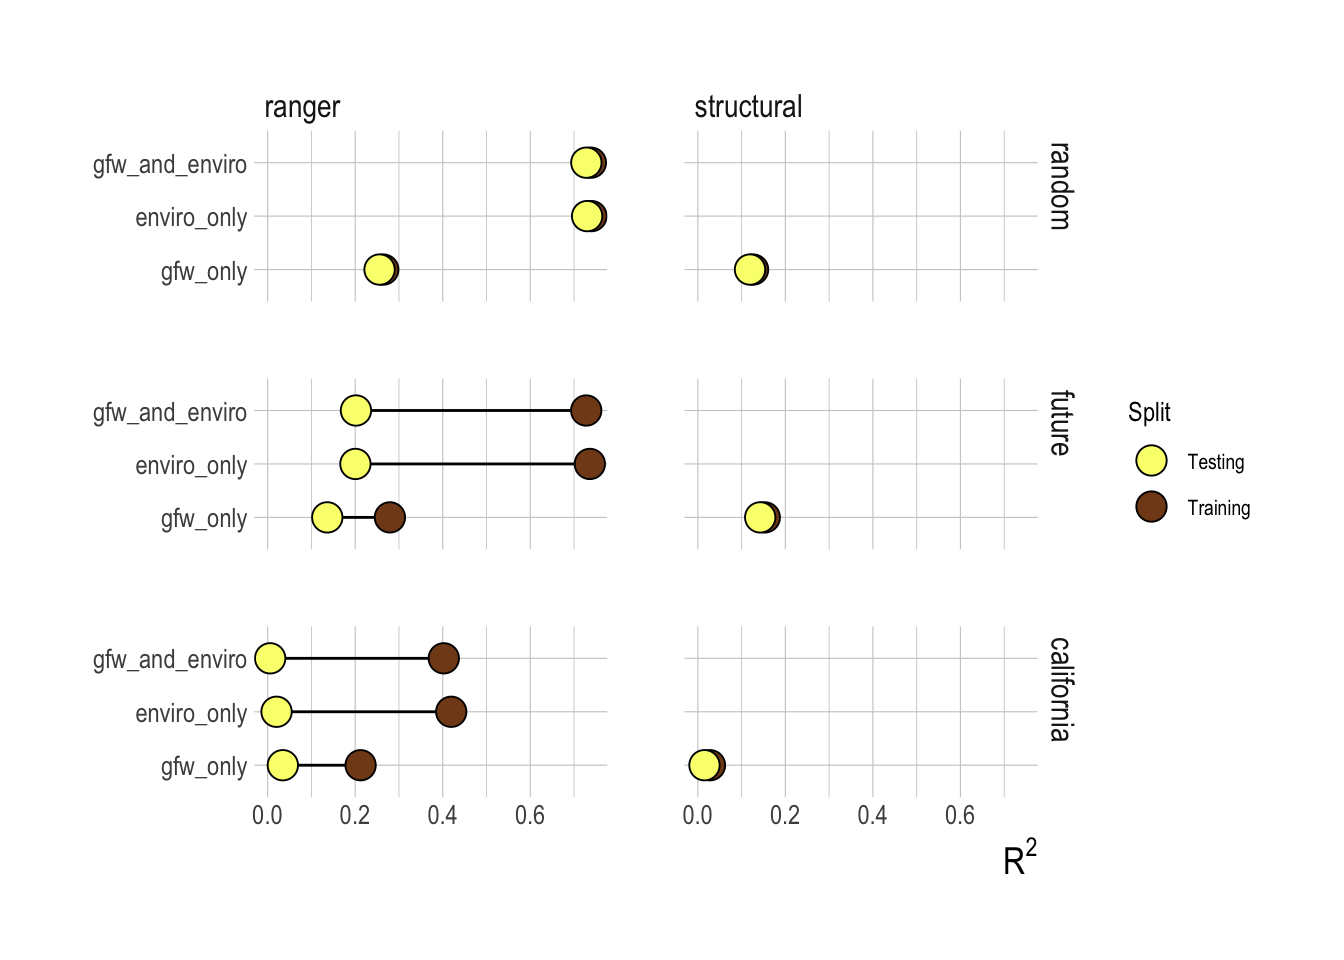 R^2^ for testing and training splits across candidate variables and models. Columns represent the ranger (random forest) and structural models, rows are test-training splits, where row name indicates the dataset that was held out for testing